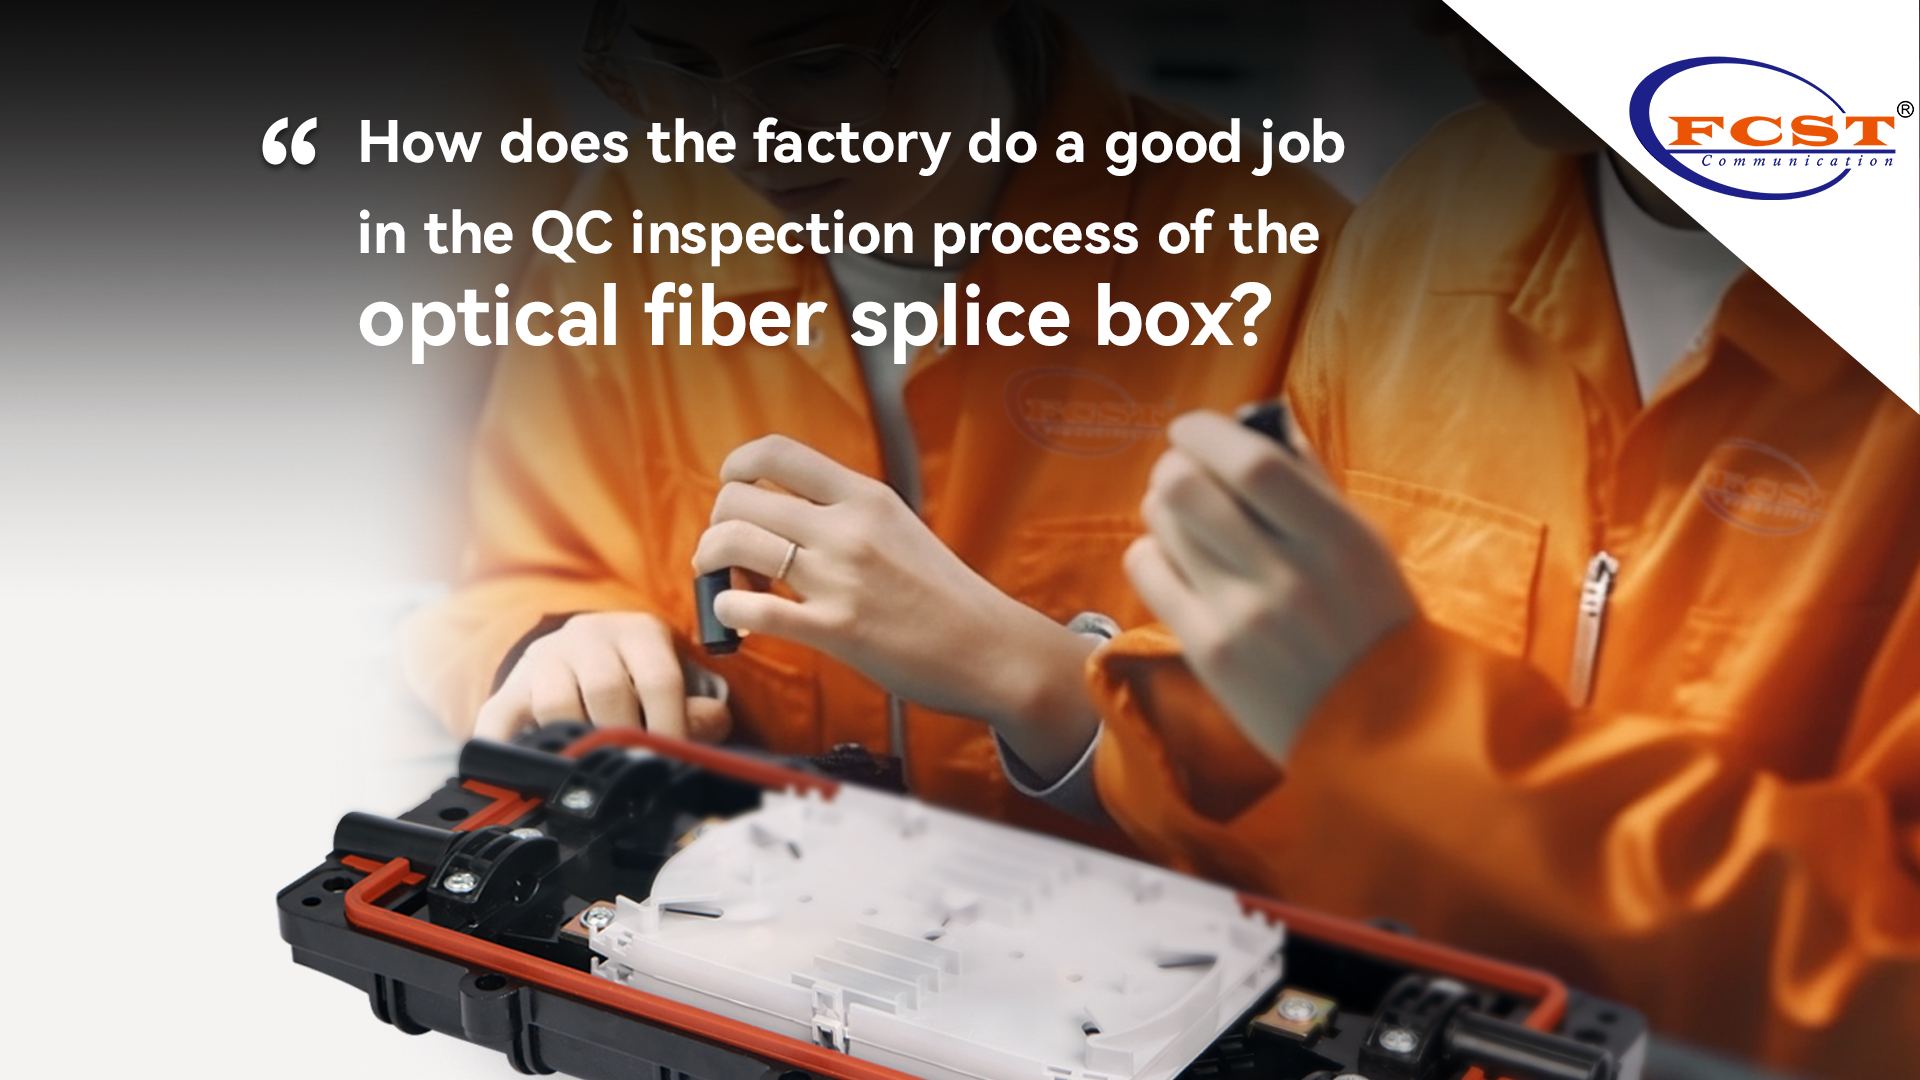 How does the factory do a good job in the QC inspection process of the optical fiber splice box?